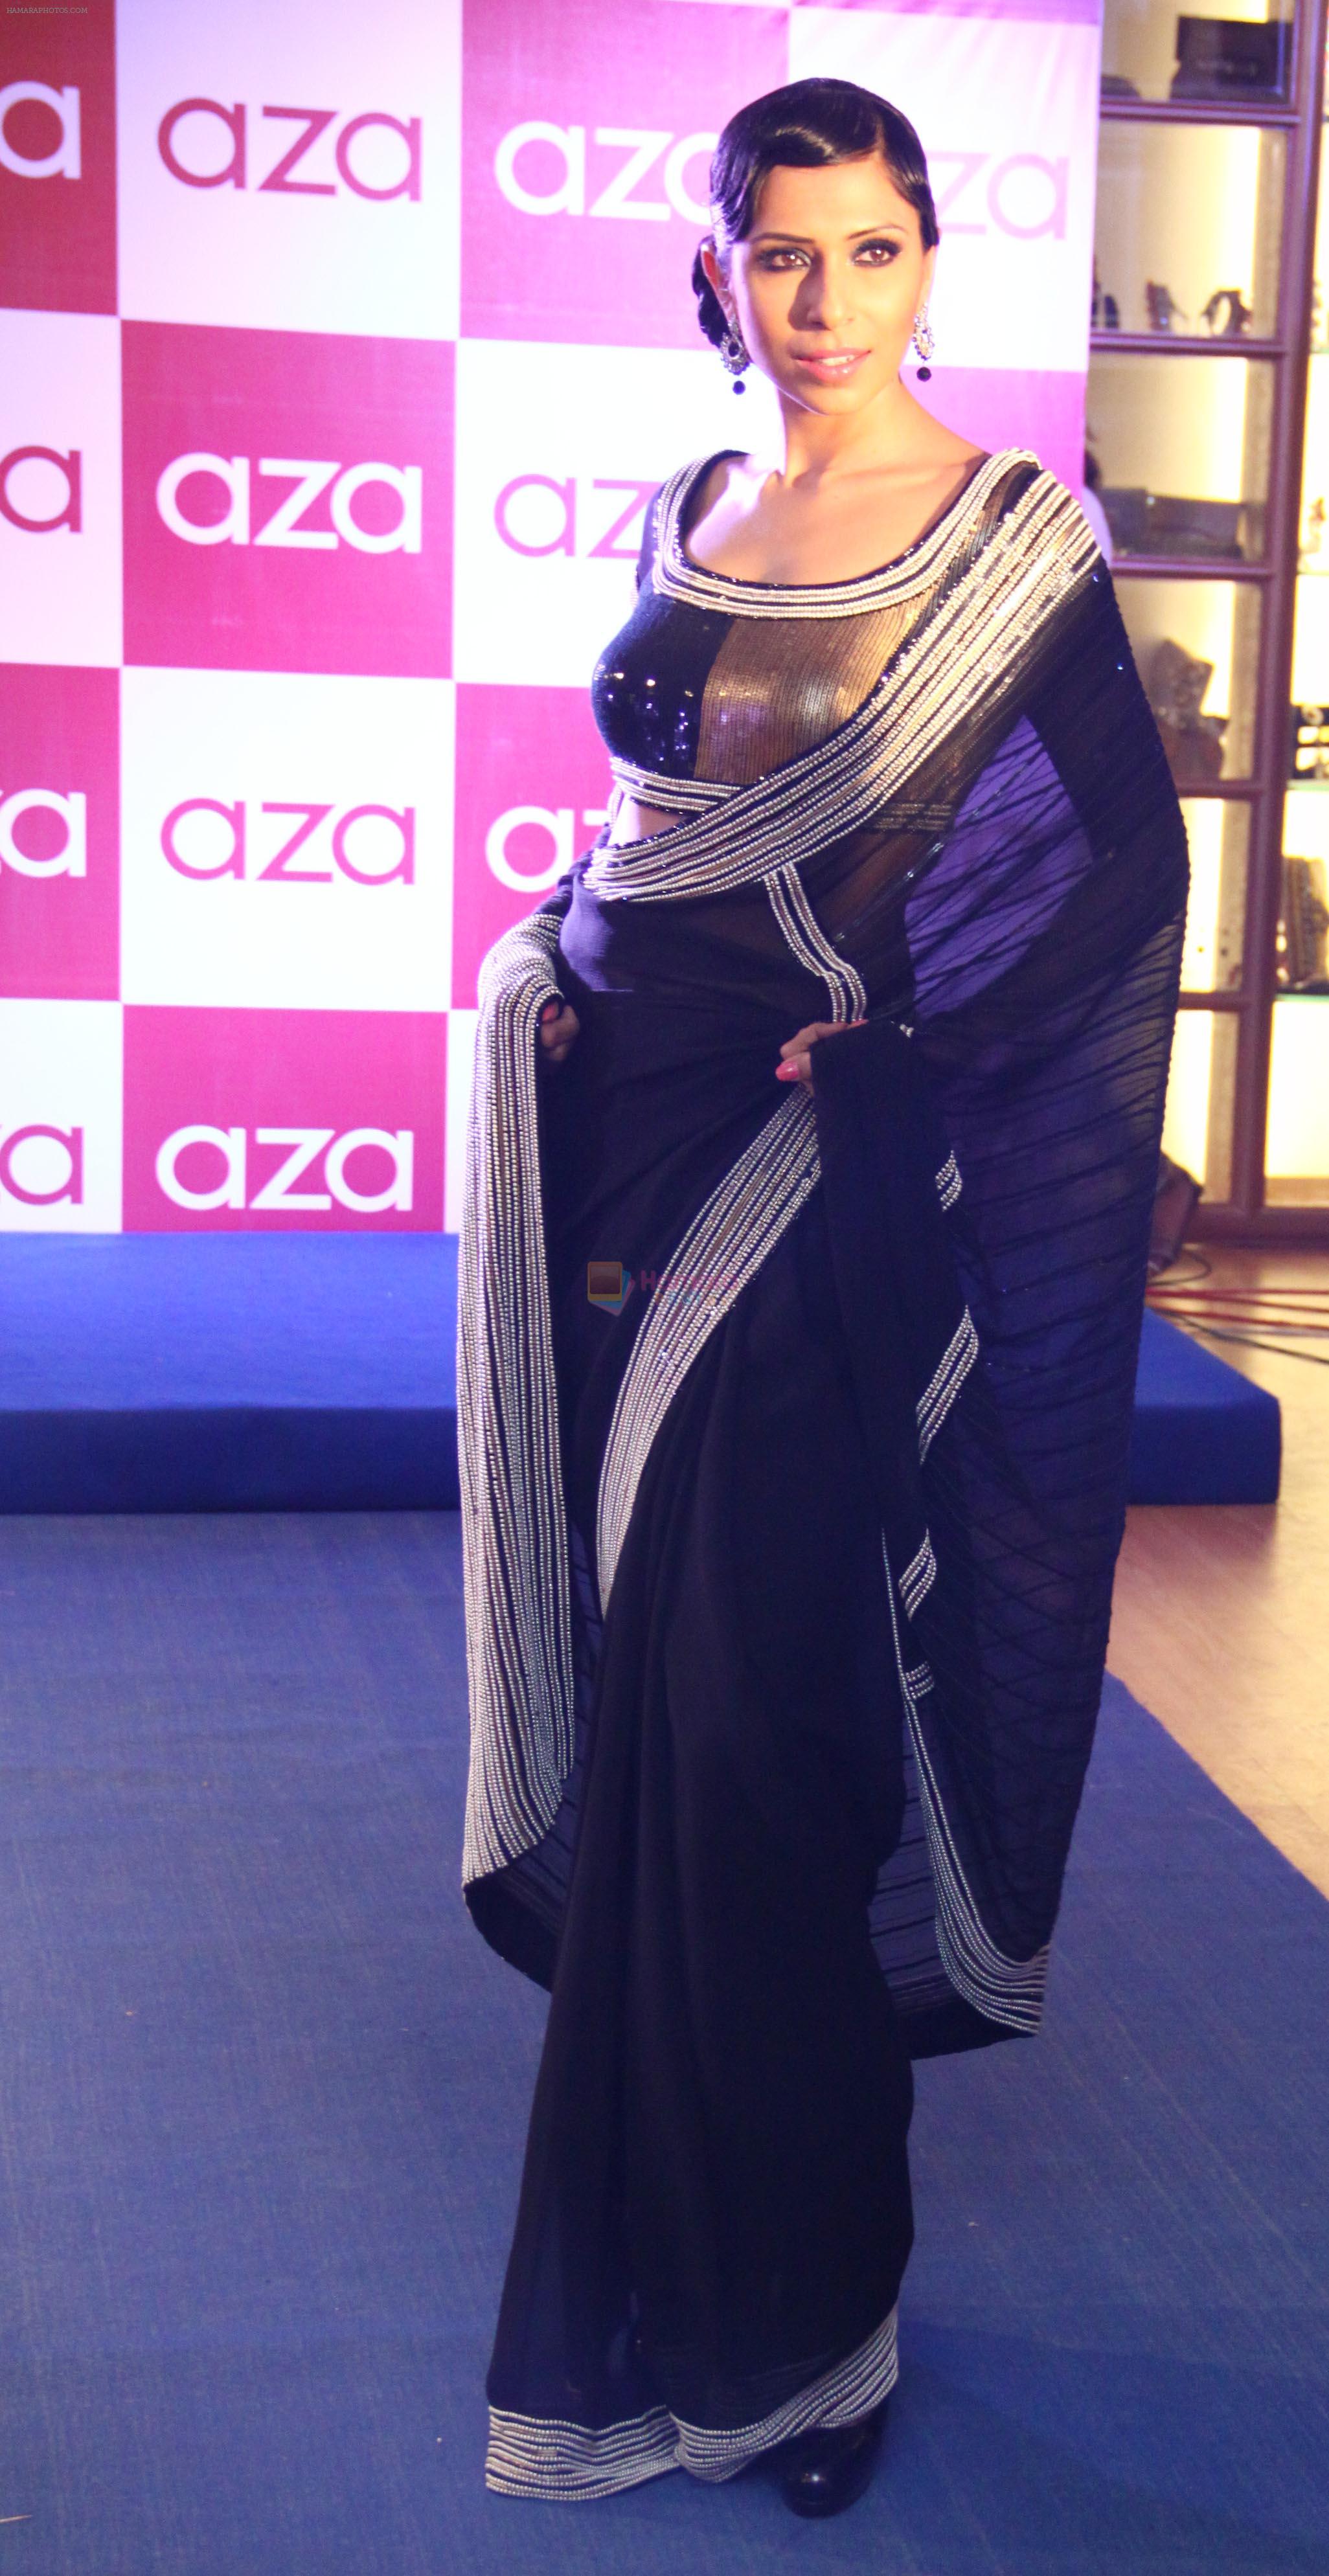 Candice Pinto at the Aza store launch in Ludhiana on 18th May 2012